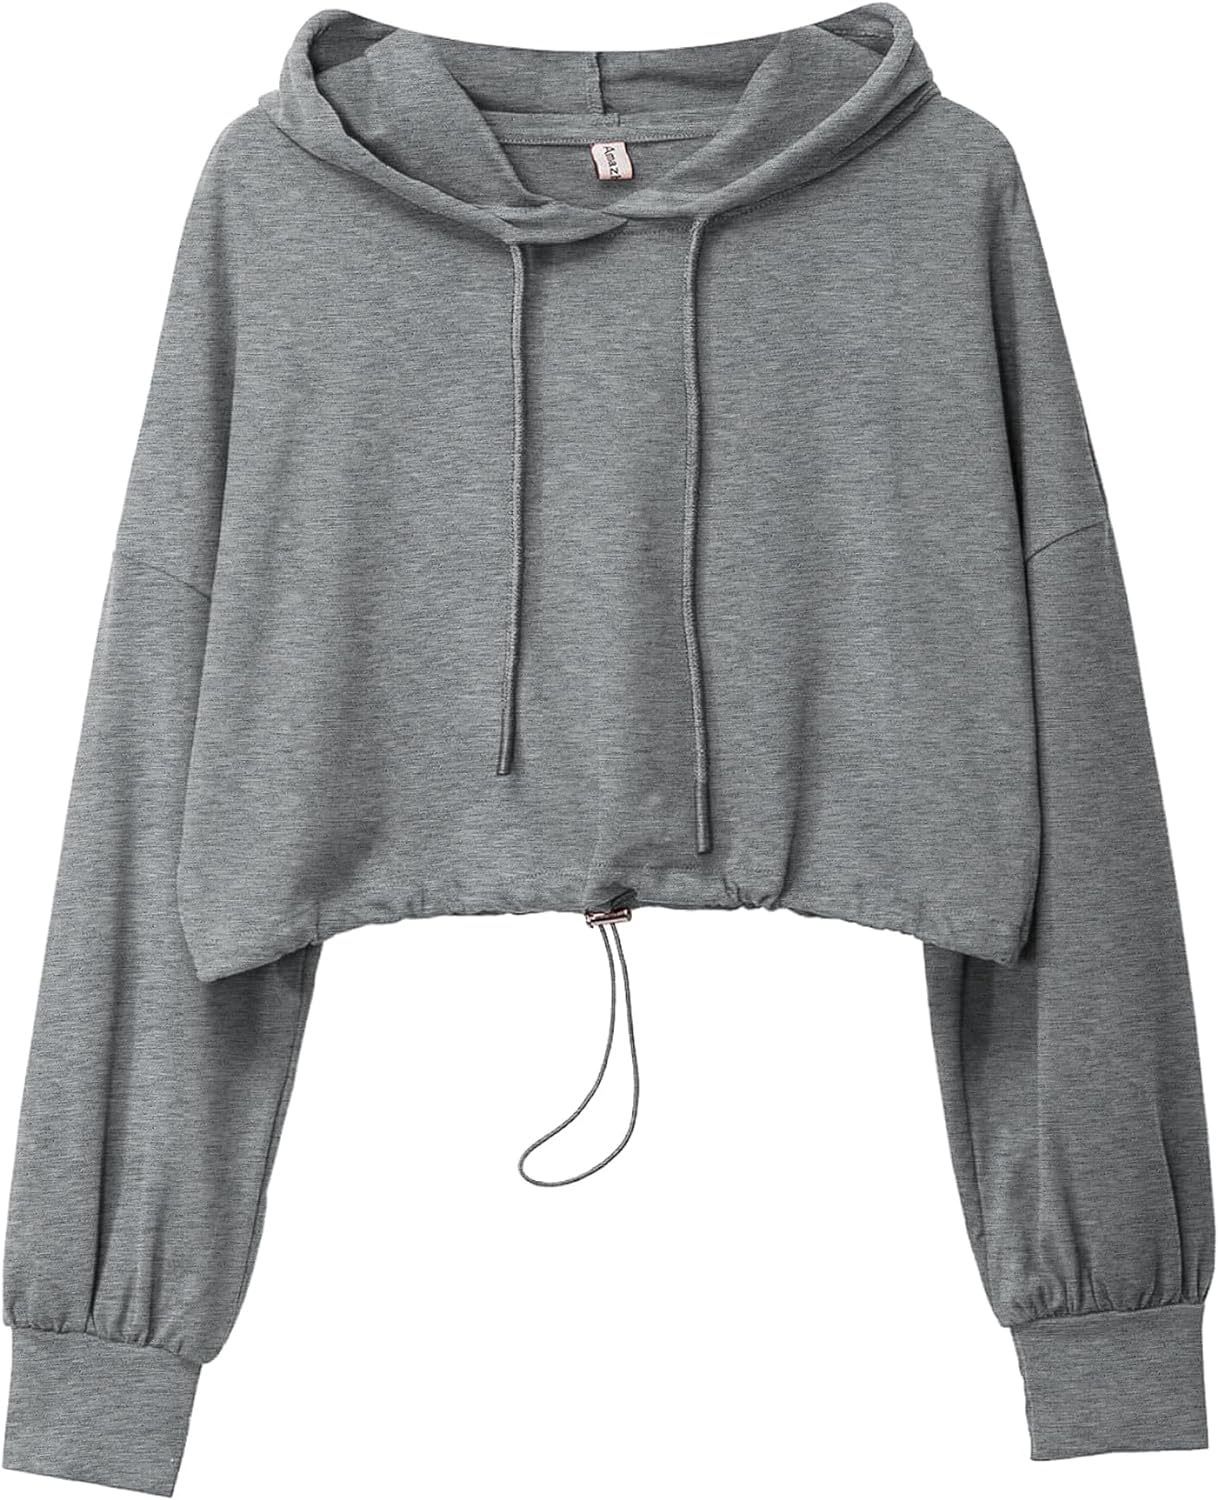 NTG Fad Heather Grey / Small Cropped Hoodies Long Sleeve Drawstring Casual Crop Top